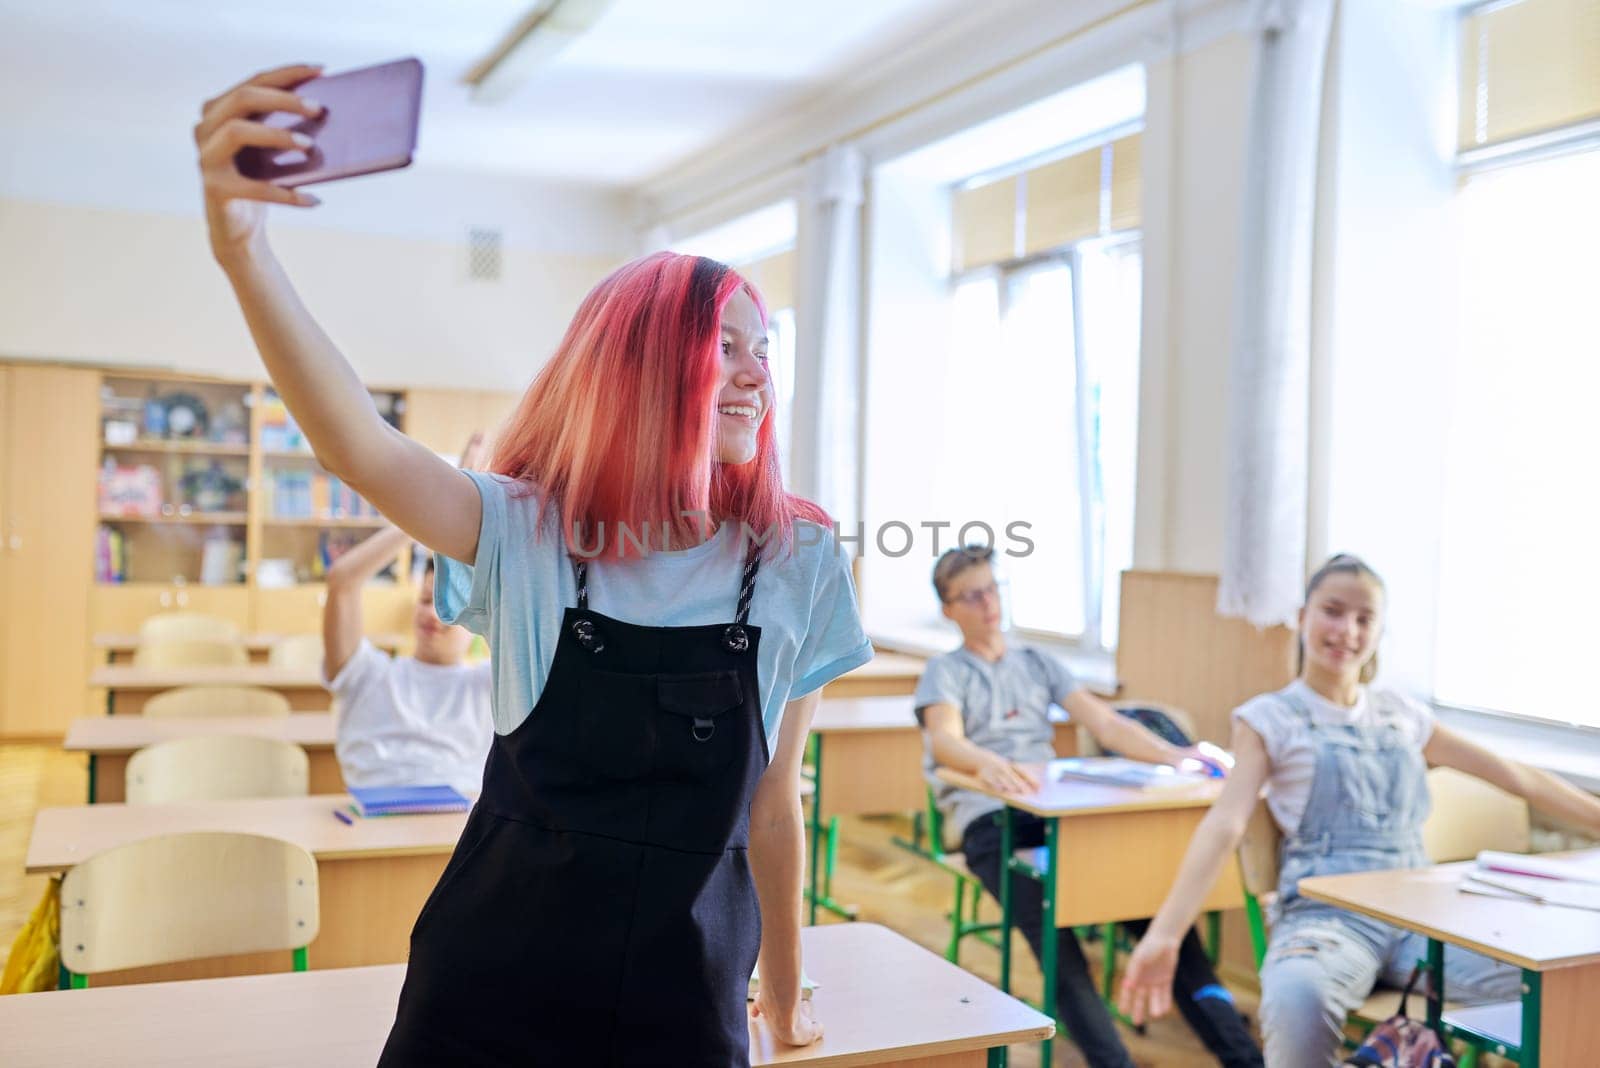 Teenagers students having fun in the classroom, bright trendy girl taking selfie photo with group of classmates friends at school